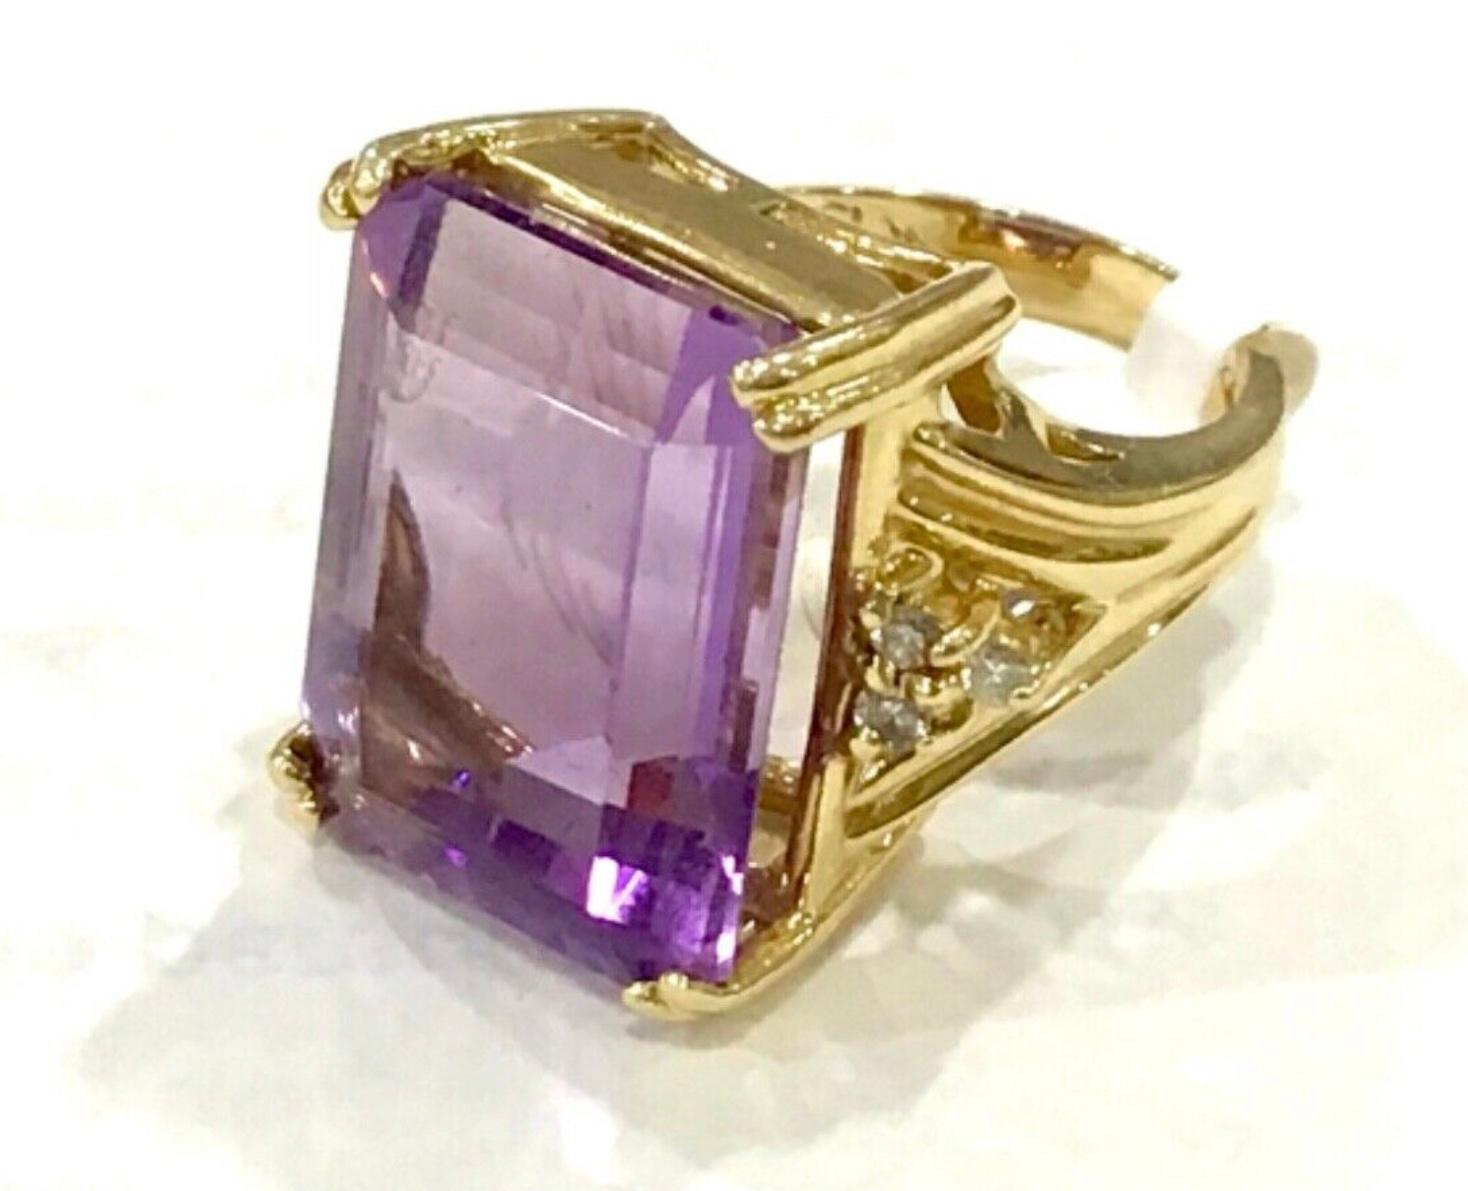 14k Yellow Gold Amethyst and Diamond Ring. 9.8 dwts. The dimensions of the amethyst baguette are approximately 19 mm length x 14 mm width x 6 mm depth. The ring has six round single cut diamonds. Marked 14k and makers brand.